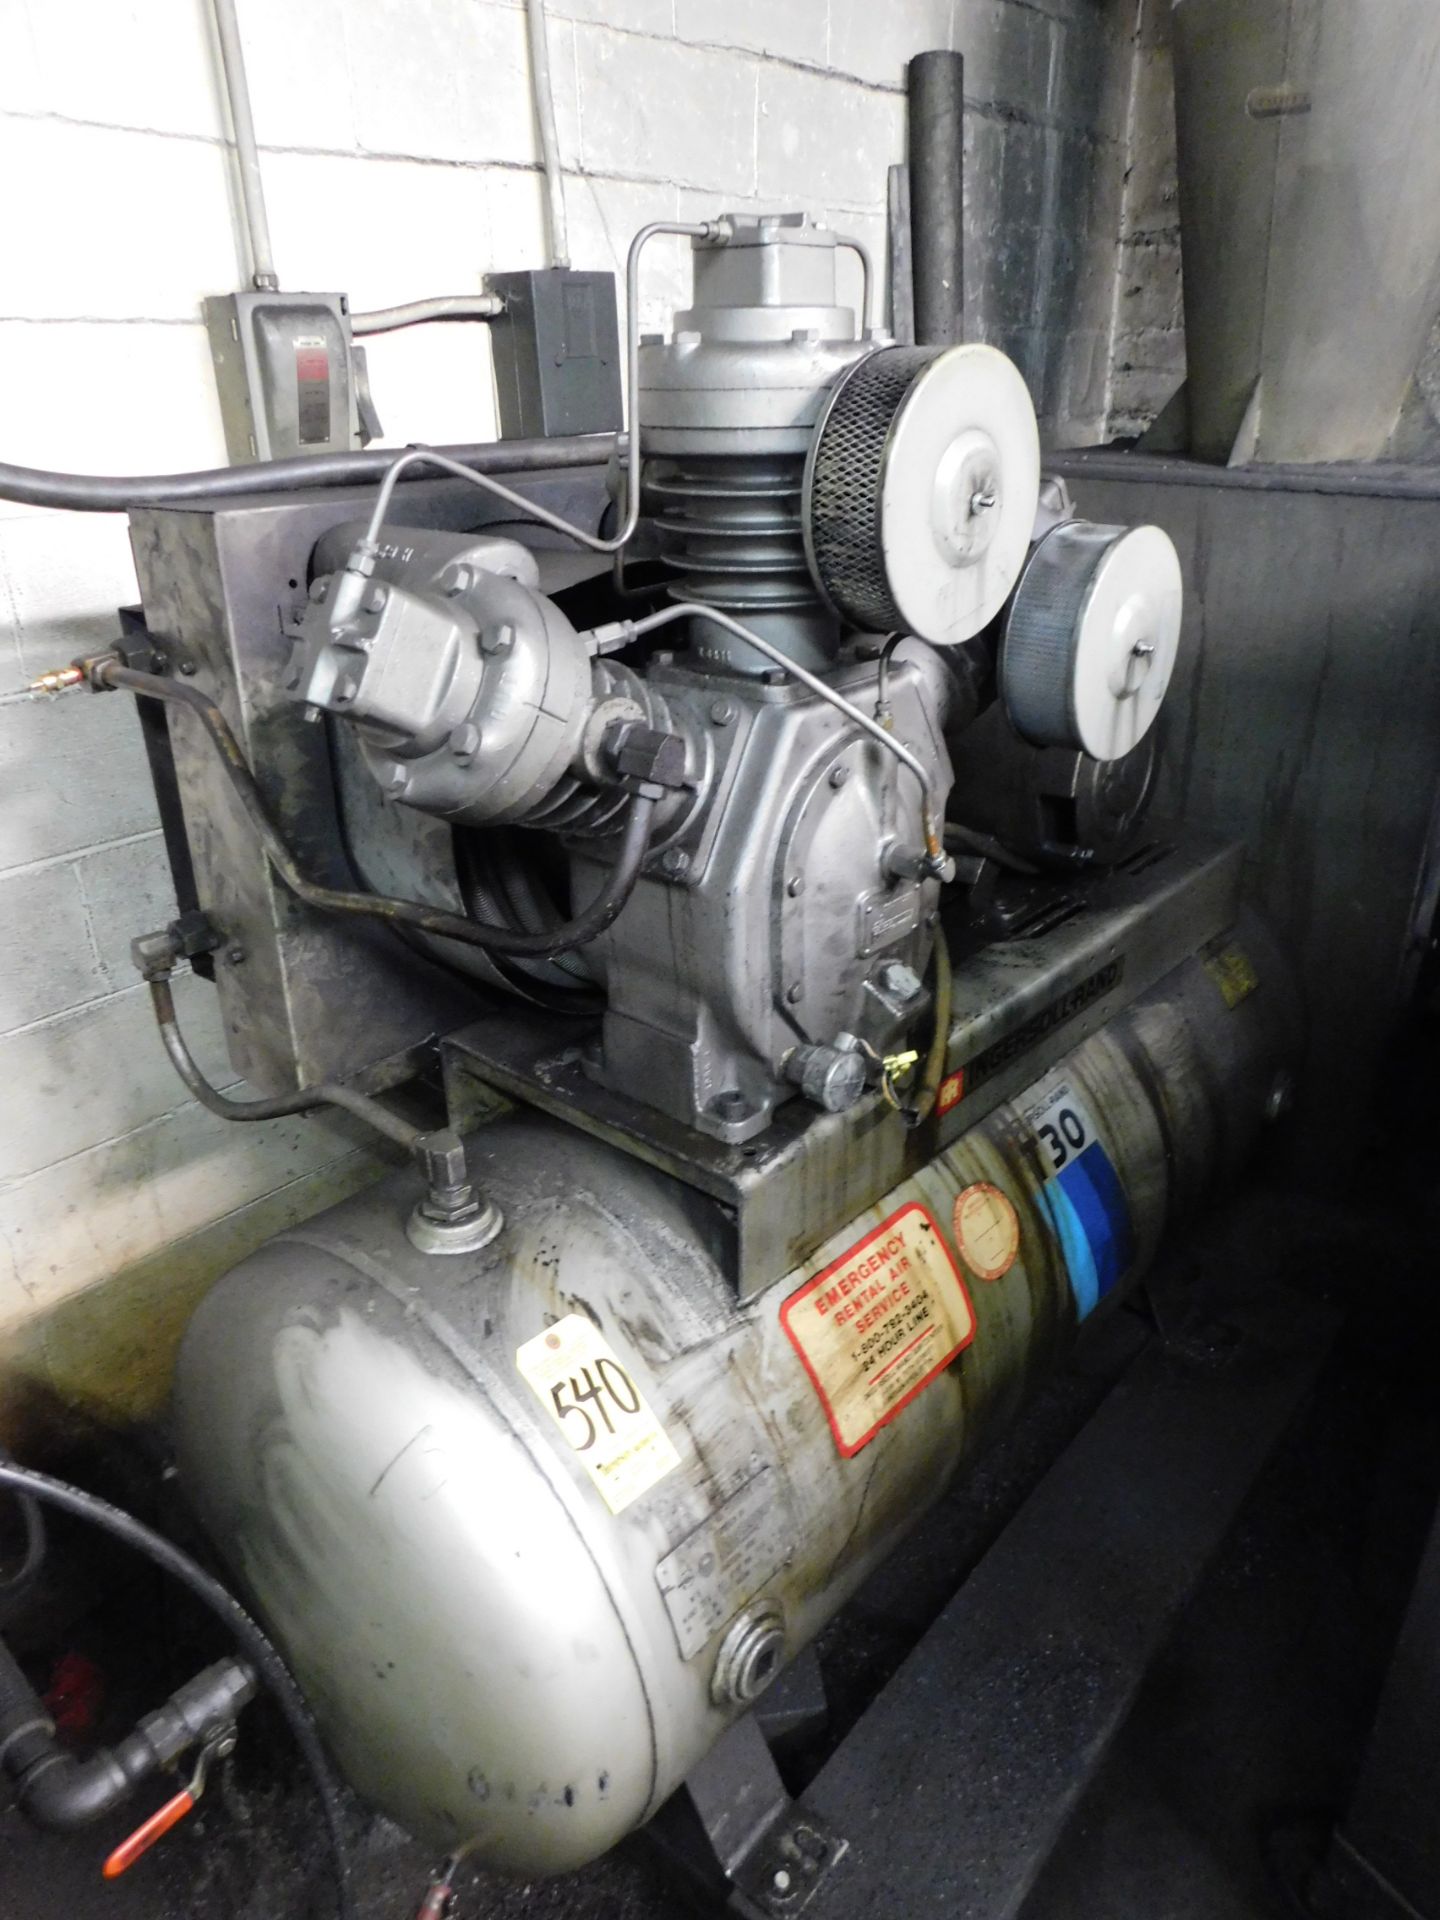 Ingersoll Rand Model T30 2-Stage Air Compressor, 15 HP, with Ingersol Rand Air Dryer (Needs Repair)